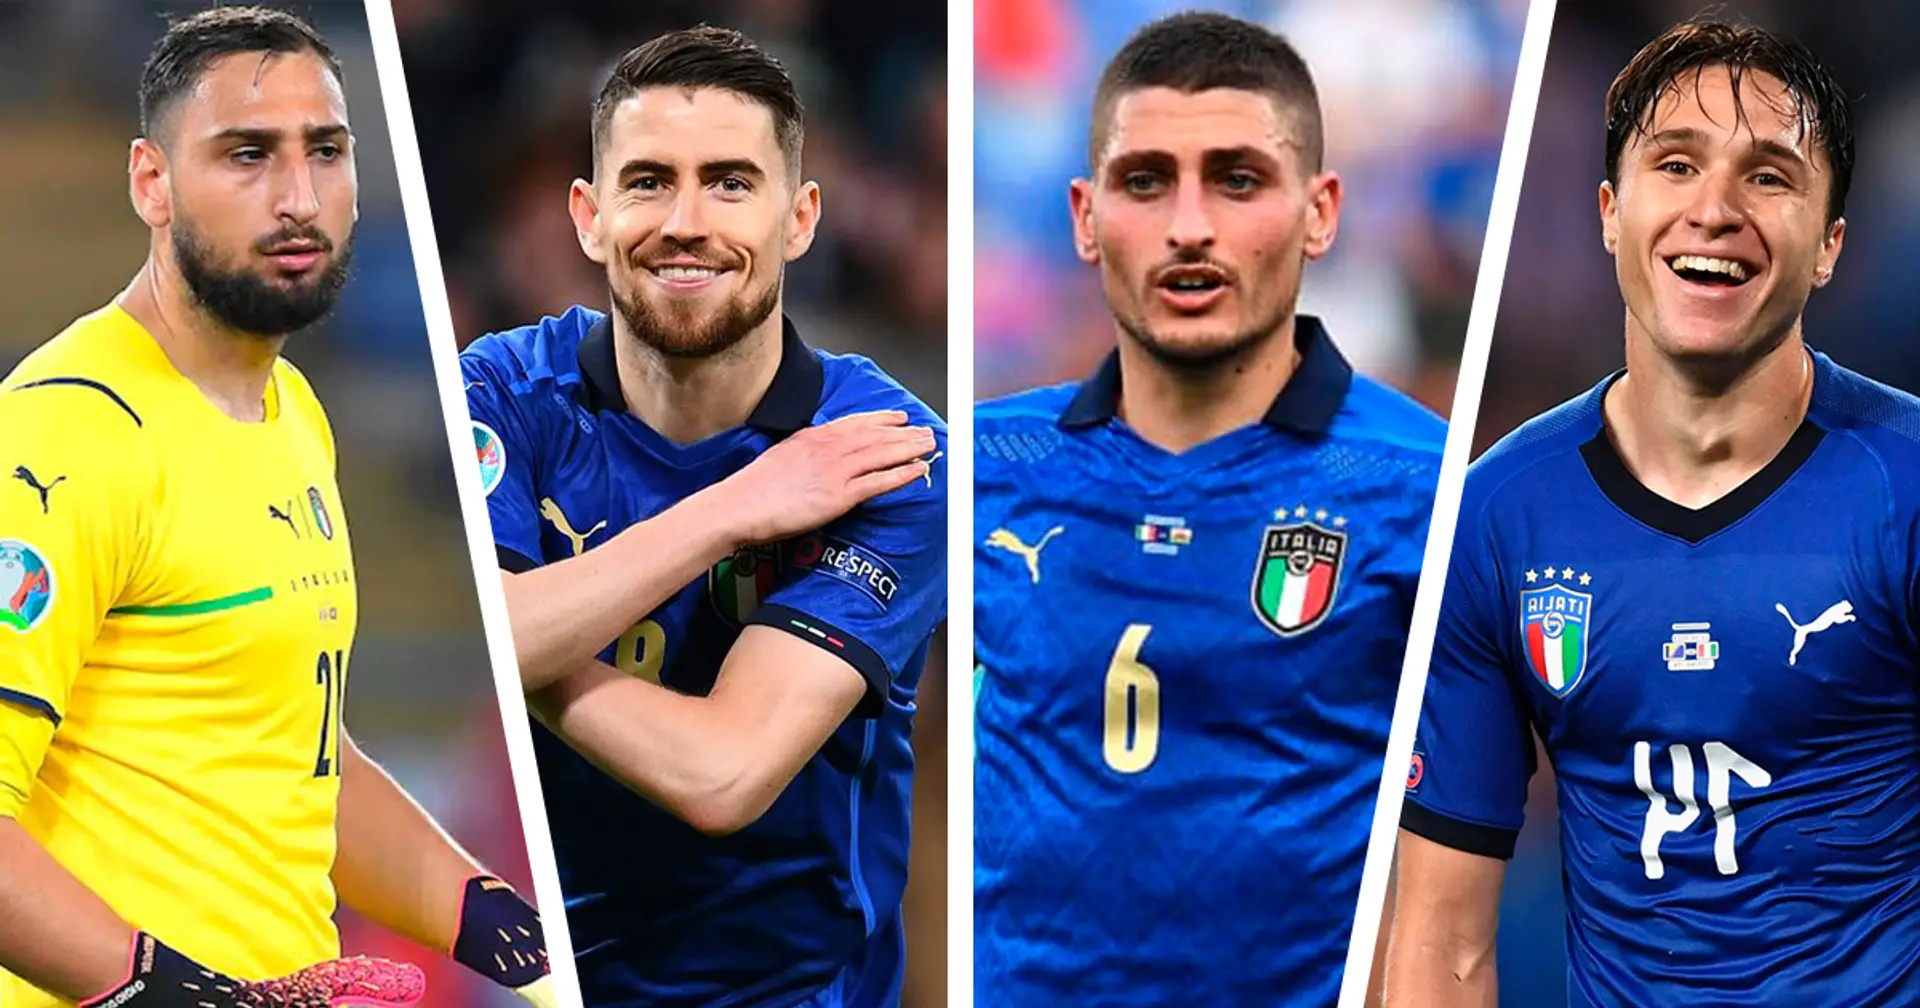 If Barca could sign one Italy player for €0, who would you like it to be and why?